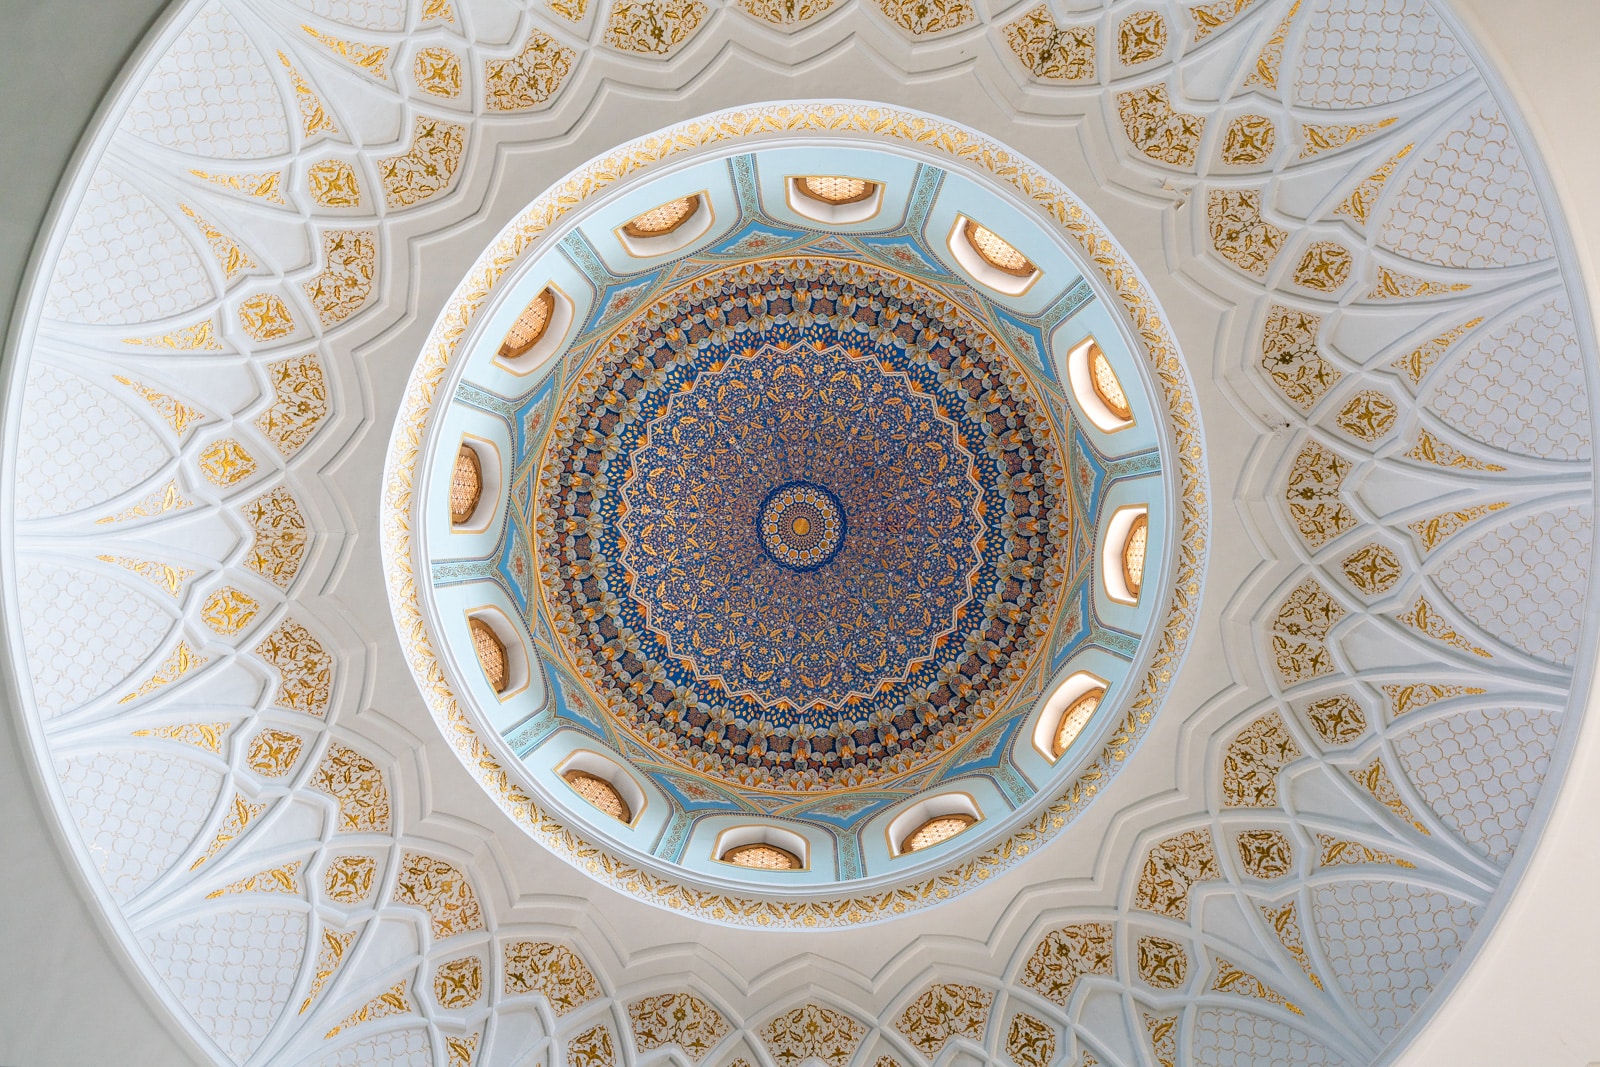 Ceiling of the Khast Imam complex